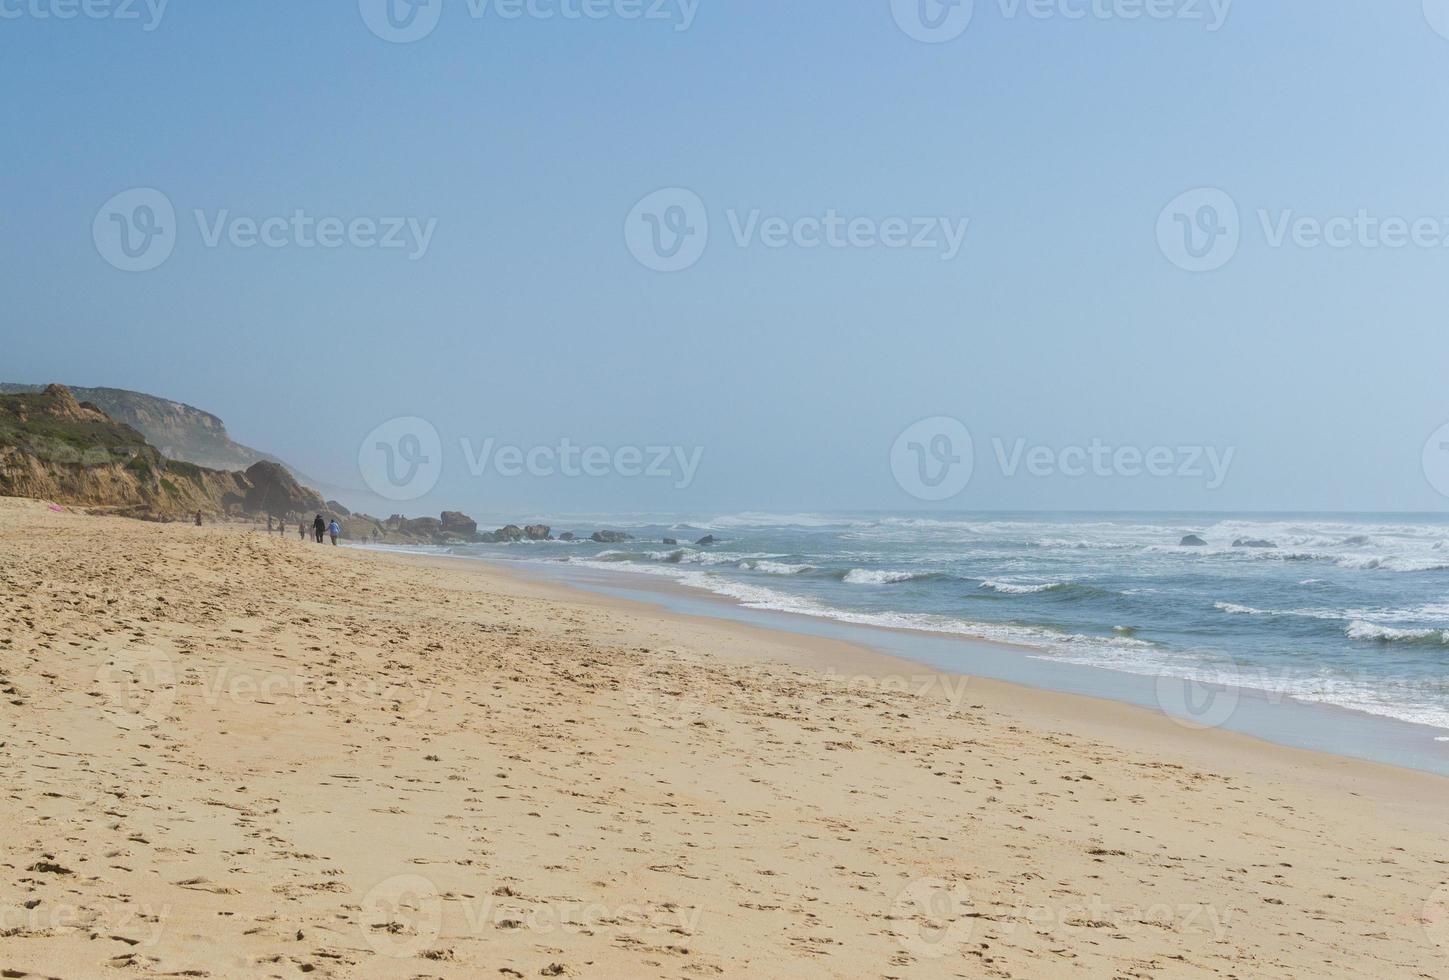 Beach by the ocean with people resting, vacation spot. Mountains, sea and waves. Travel to Europe Portugal. photo